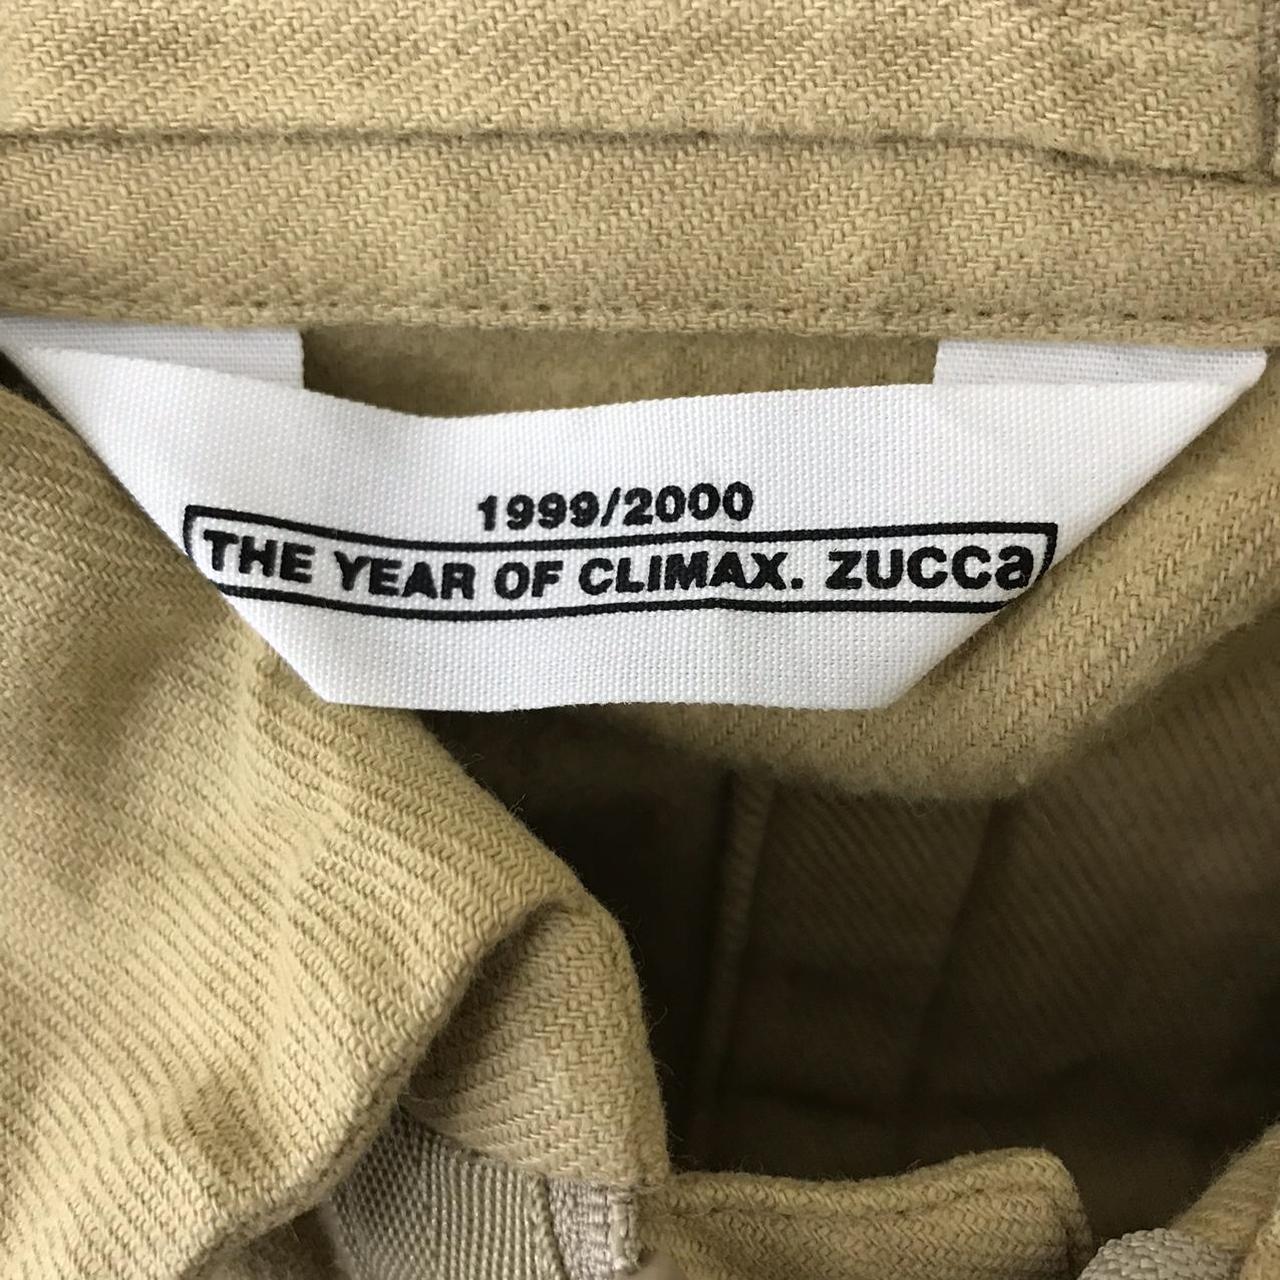 ZUCCA 1999/2000 The Year Of Climax Cabane De Zucca...